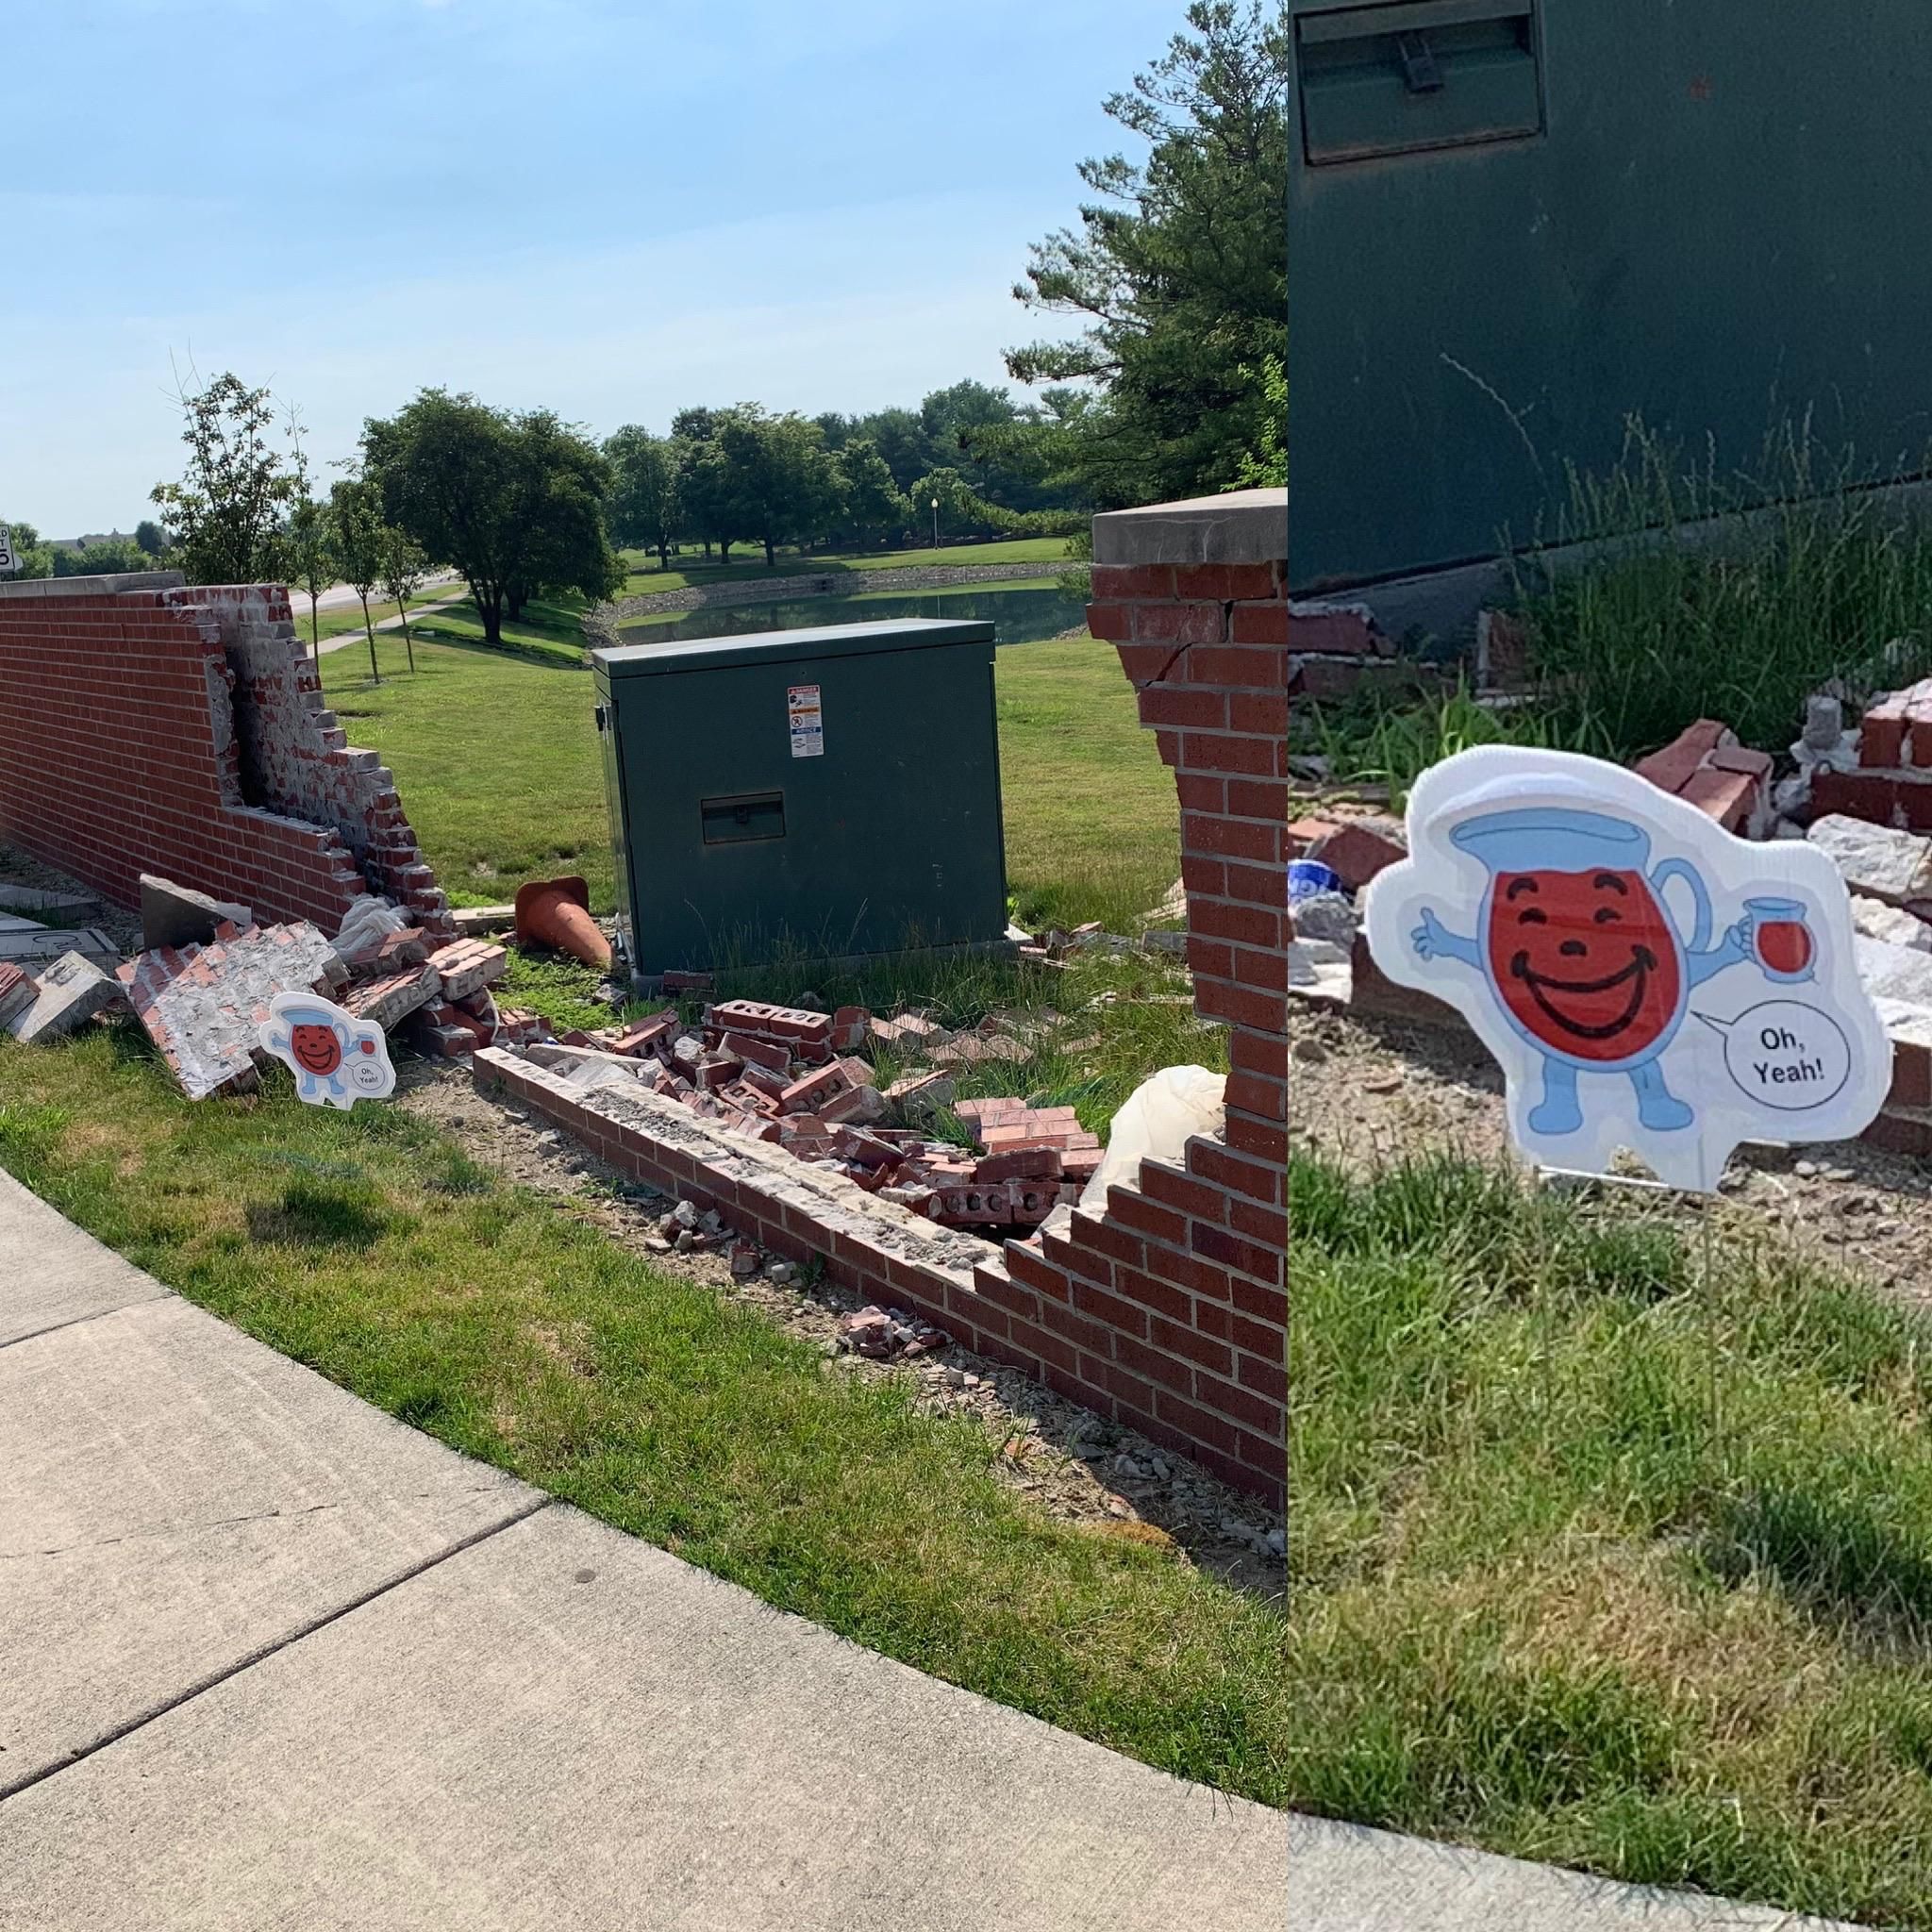 Koolaid Man spotted taking out a wall in my town.